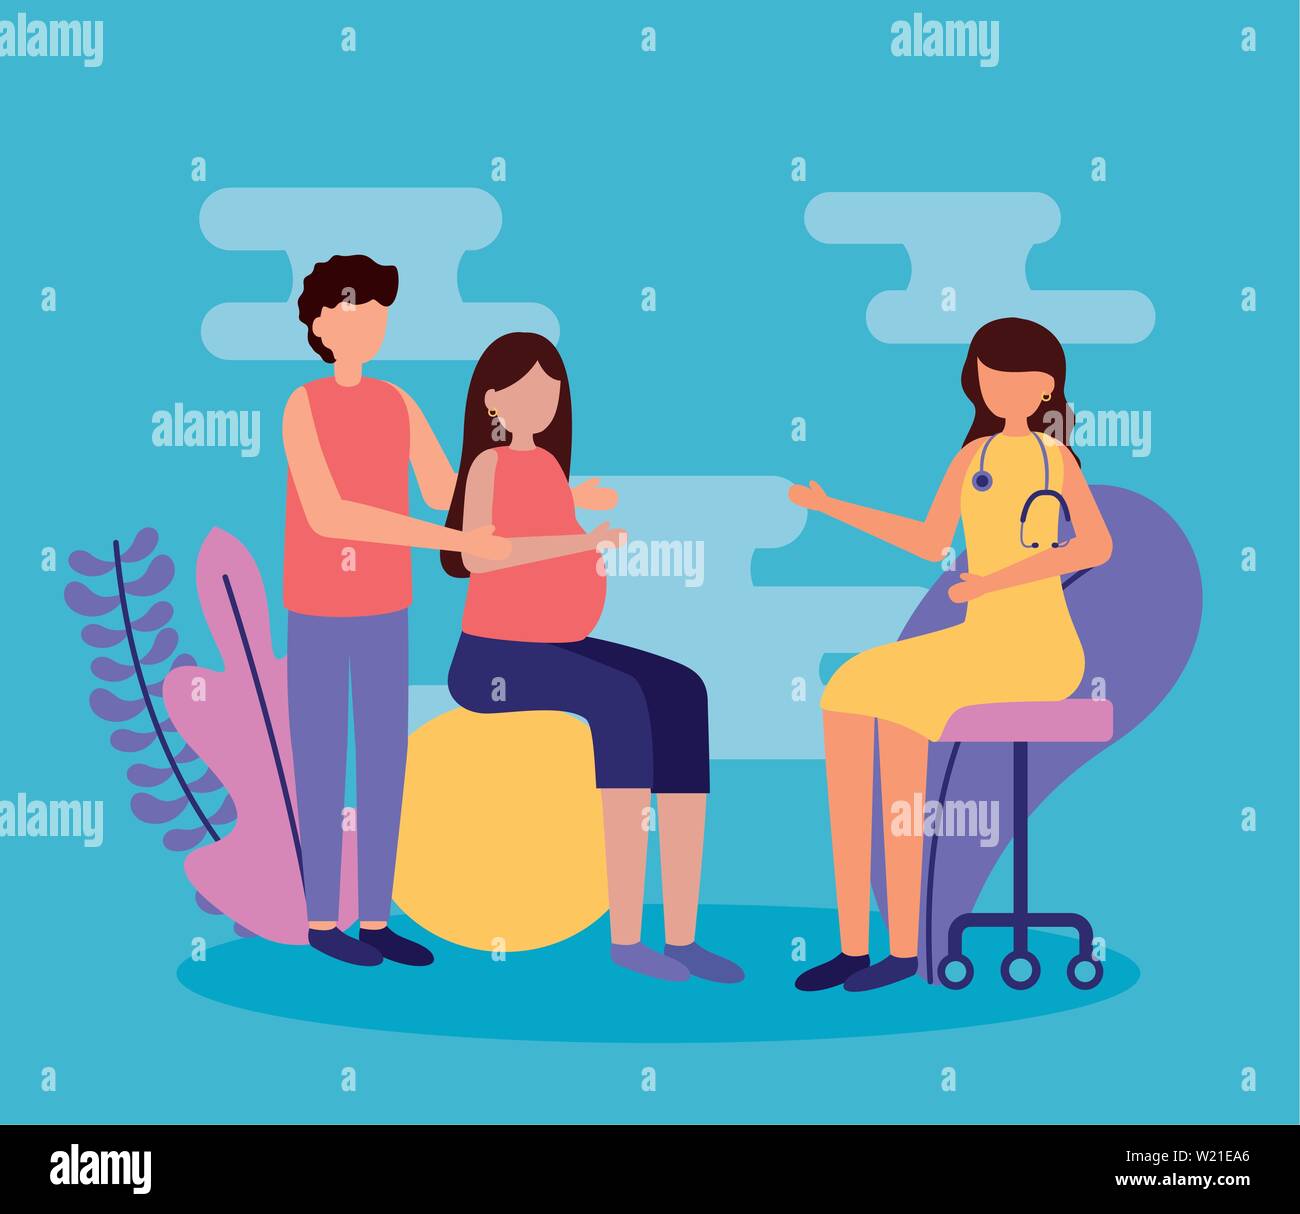 Maternity visit Stock Vector Images - Alamy